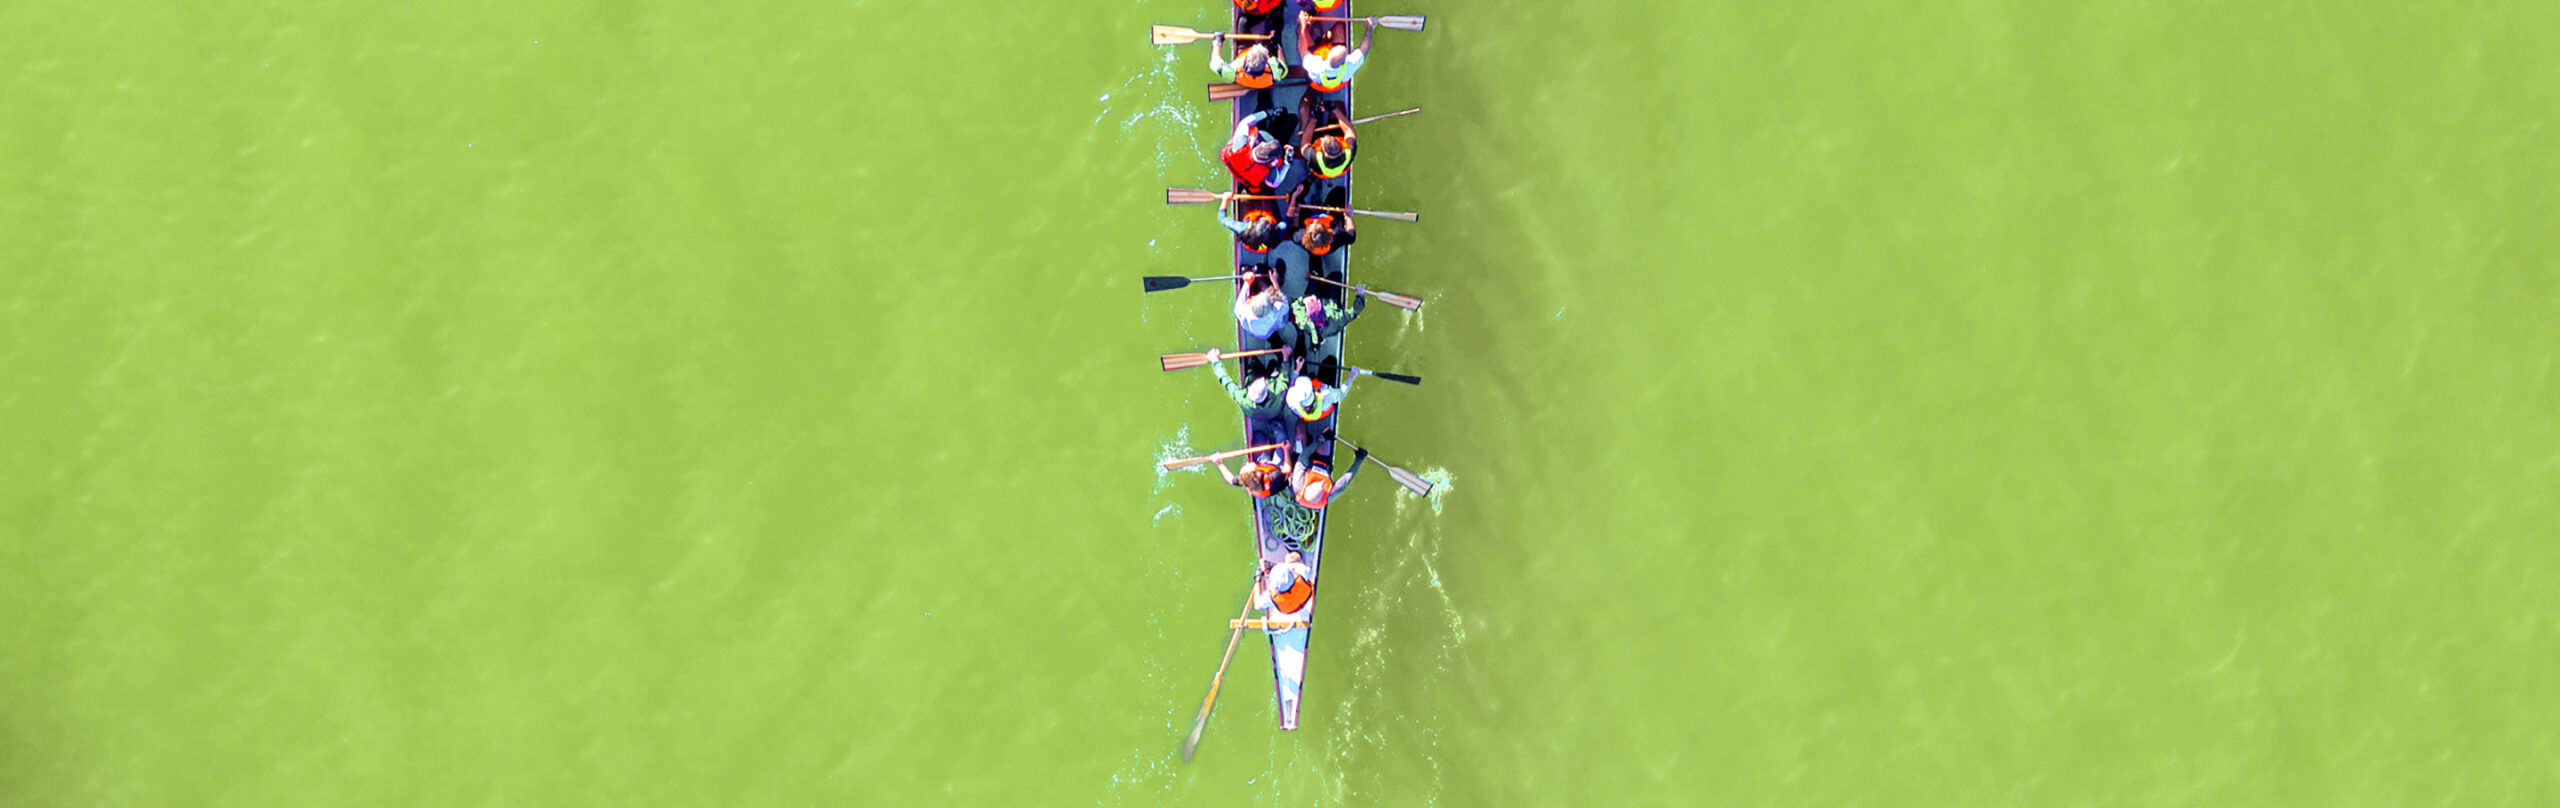 Haifa, Israel - December 11, 2020: Dragon Boat team rowing to the pace of an onboard Drummer, Aerial view.